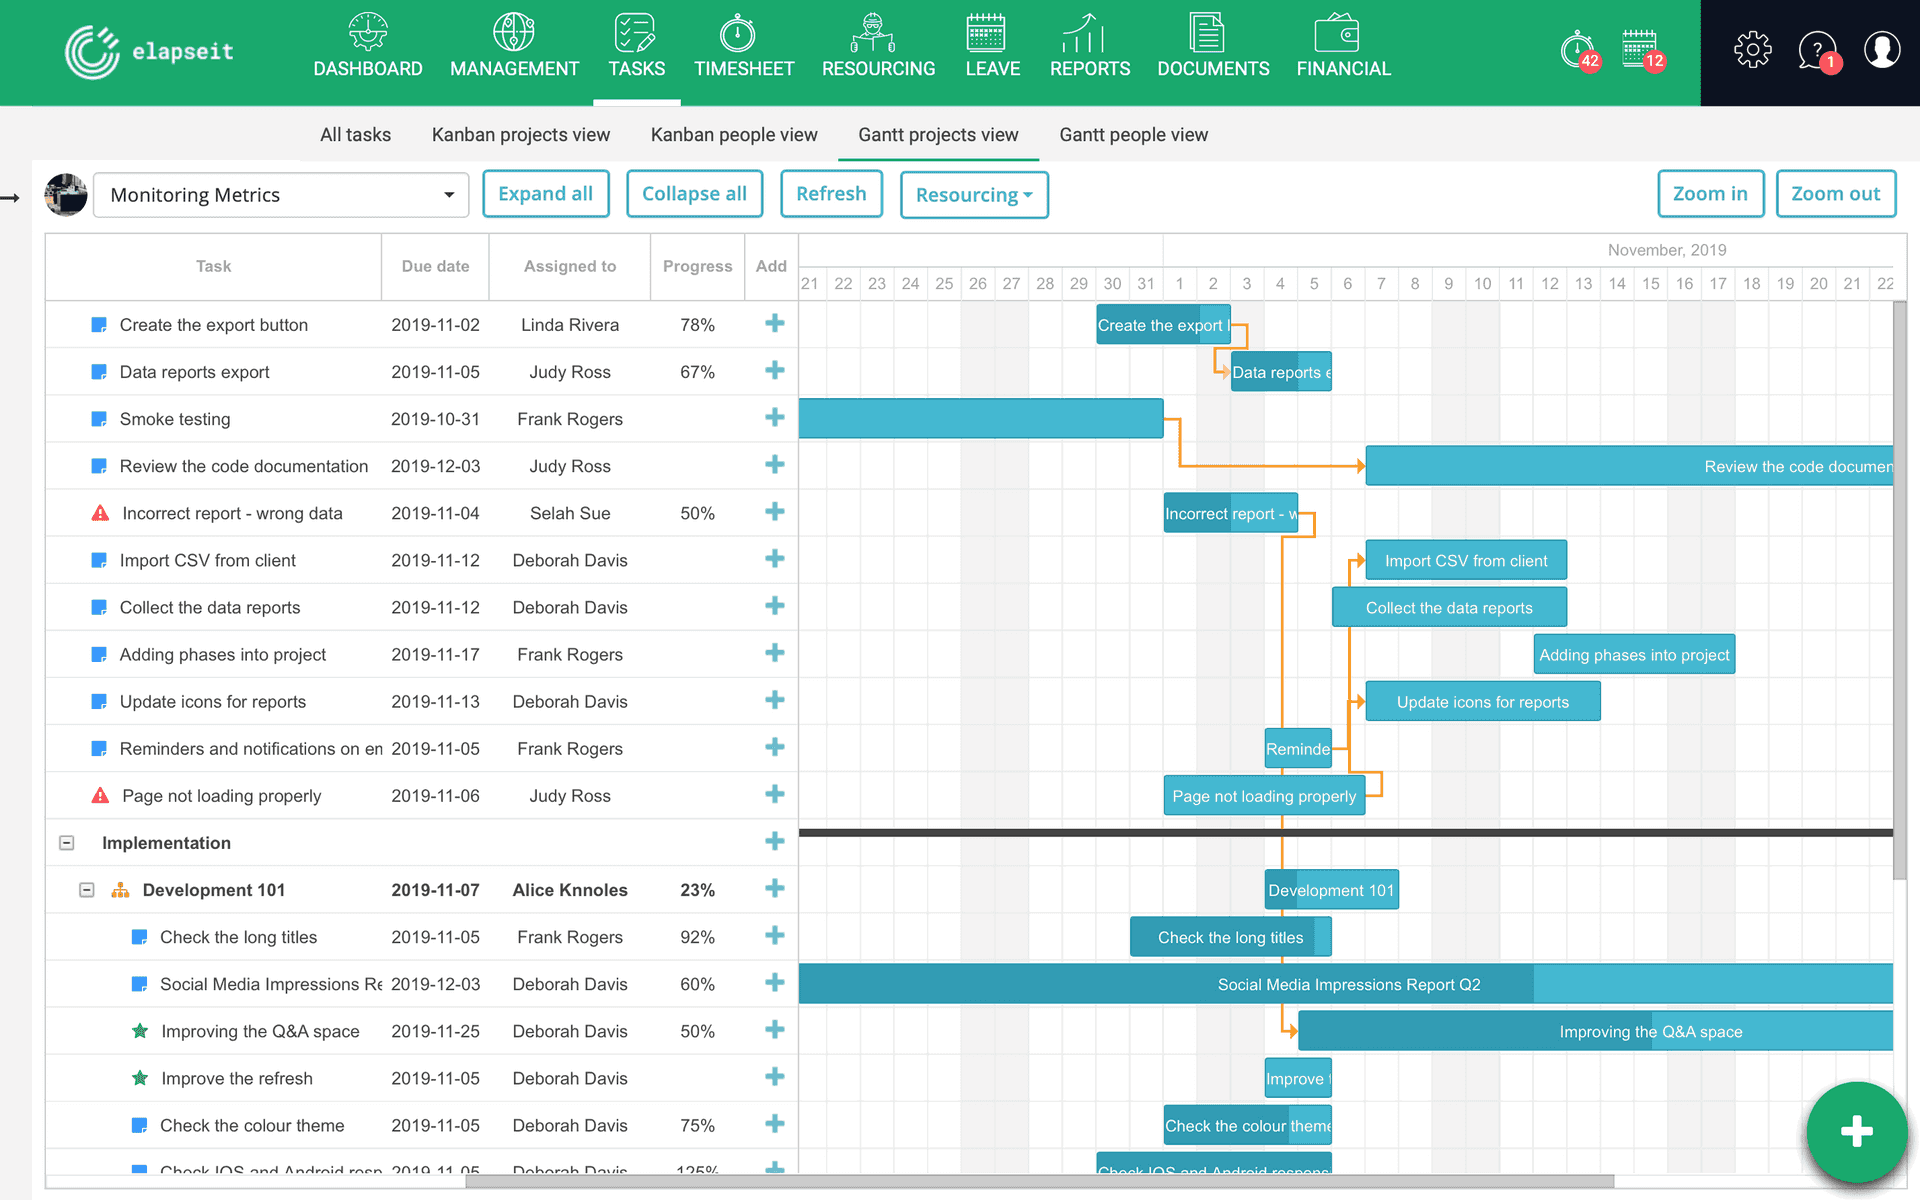 Check you project tasks dependencies in elapseit Gantt project view